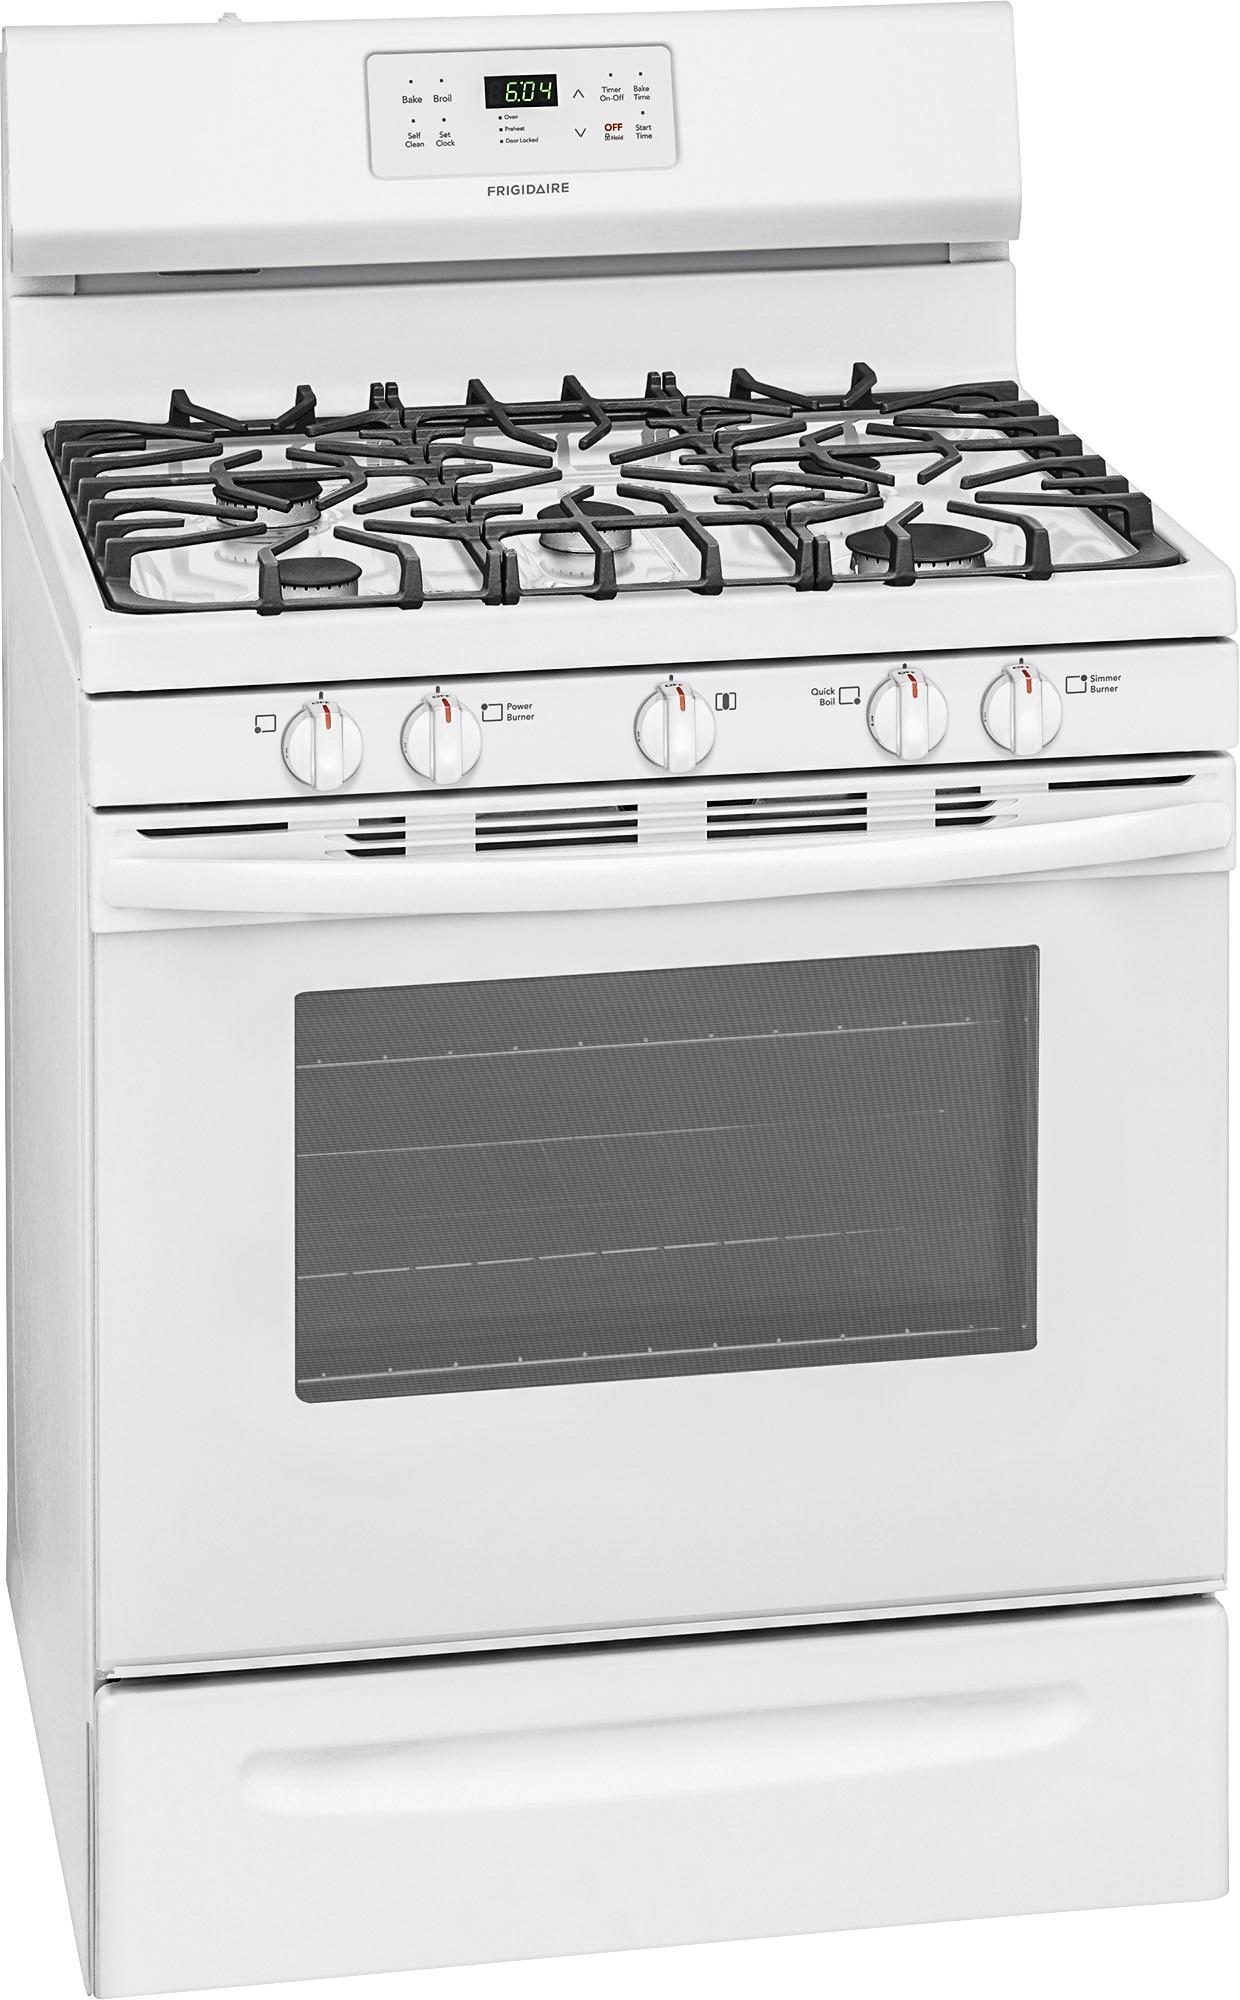 Angle View: Viking - Professional 5 Series 29.9" LP Gas Cooktop - Stainless steel